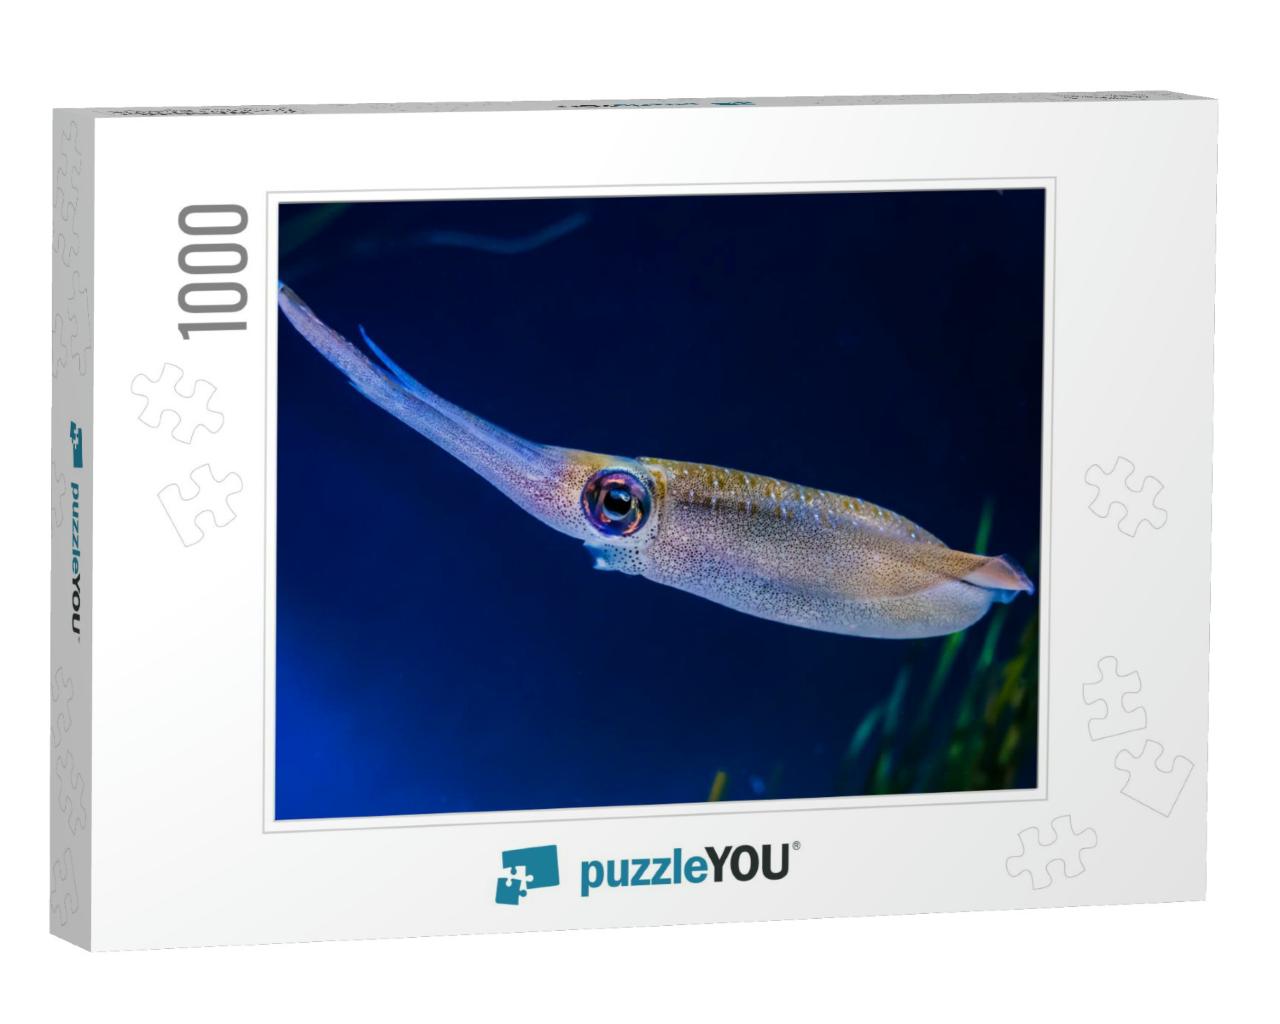 Bigfin Reef Squid Sepioteuthis Lessoniana Live in the Dee... Jigsaw Puzzle with 1000 pieces